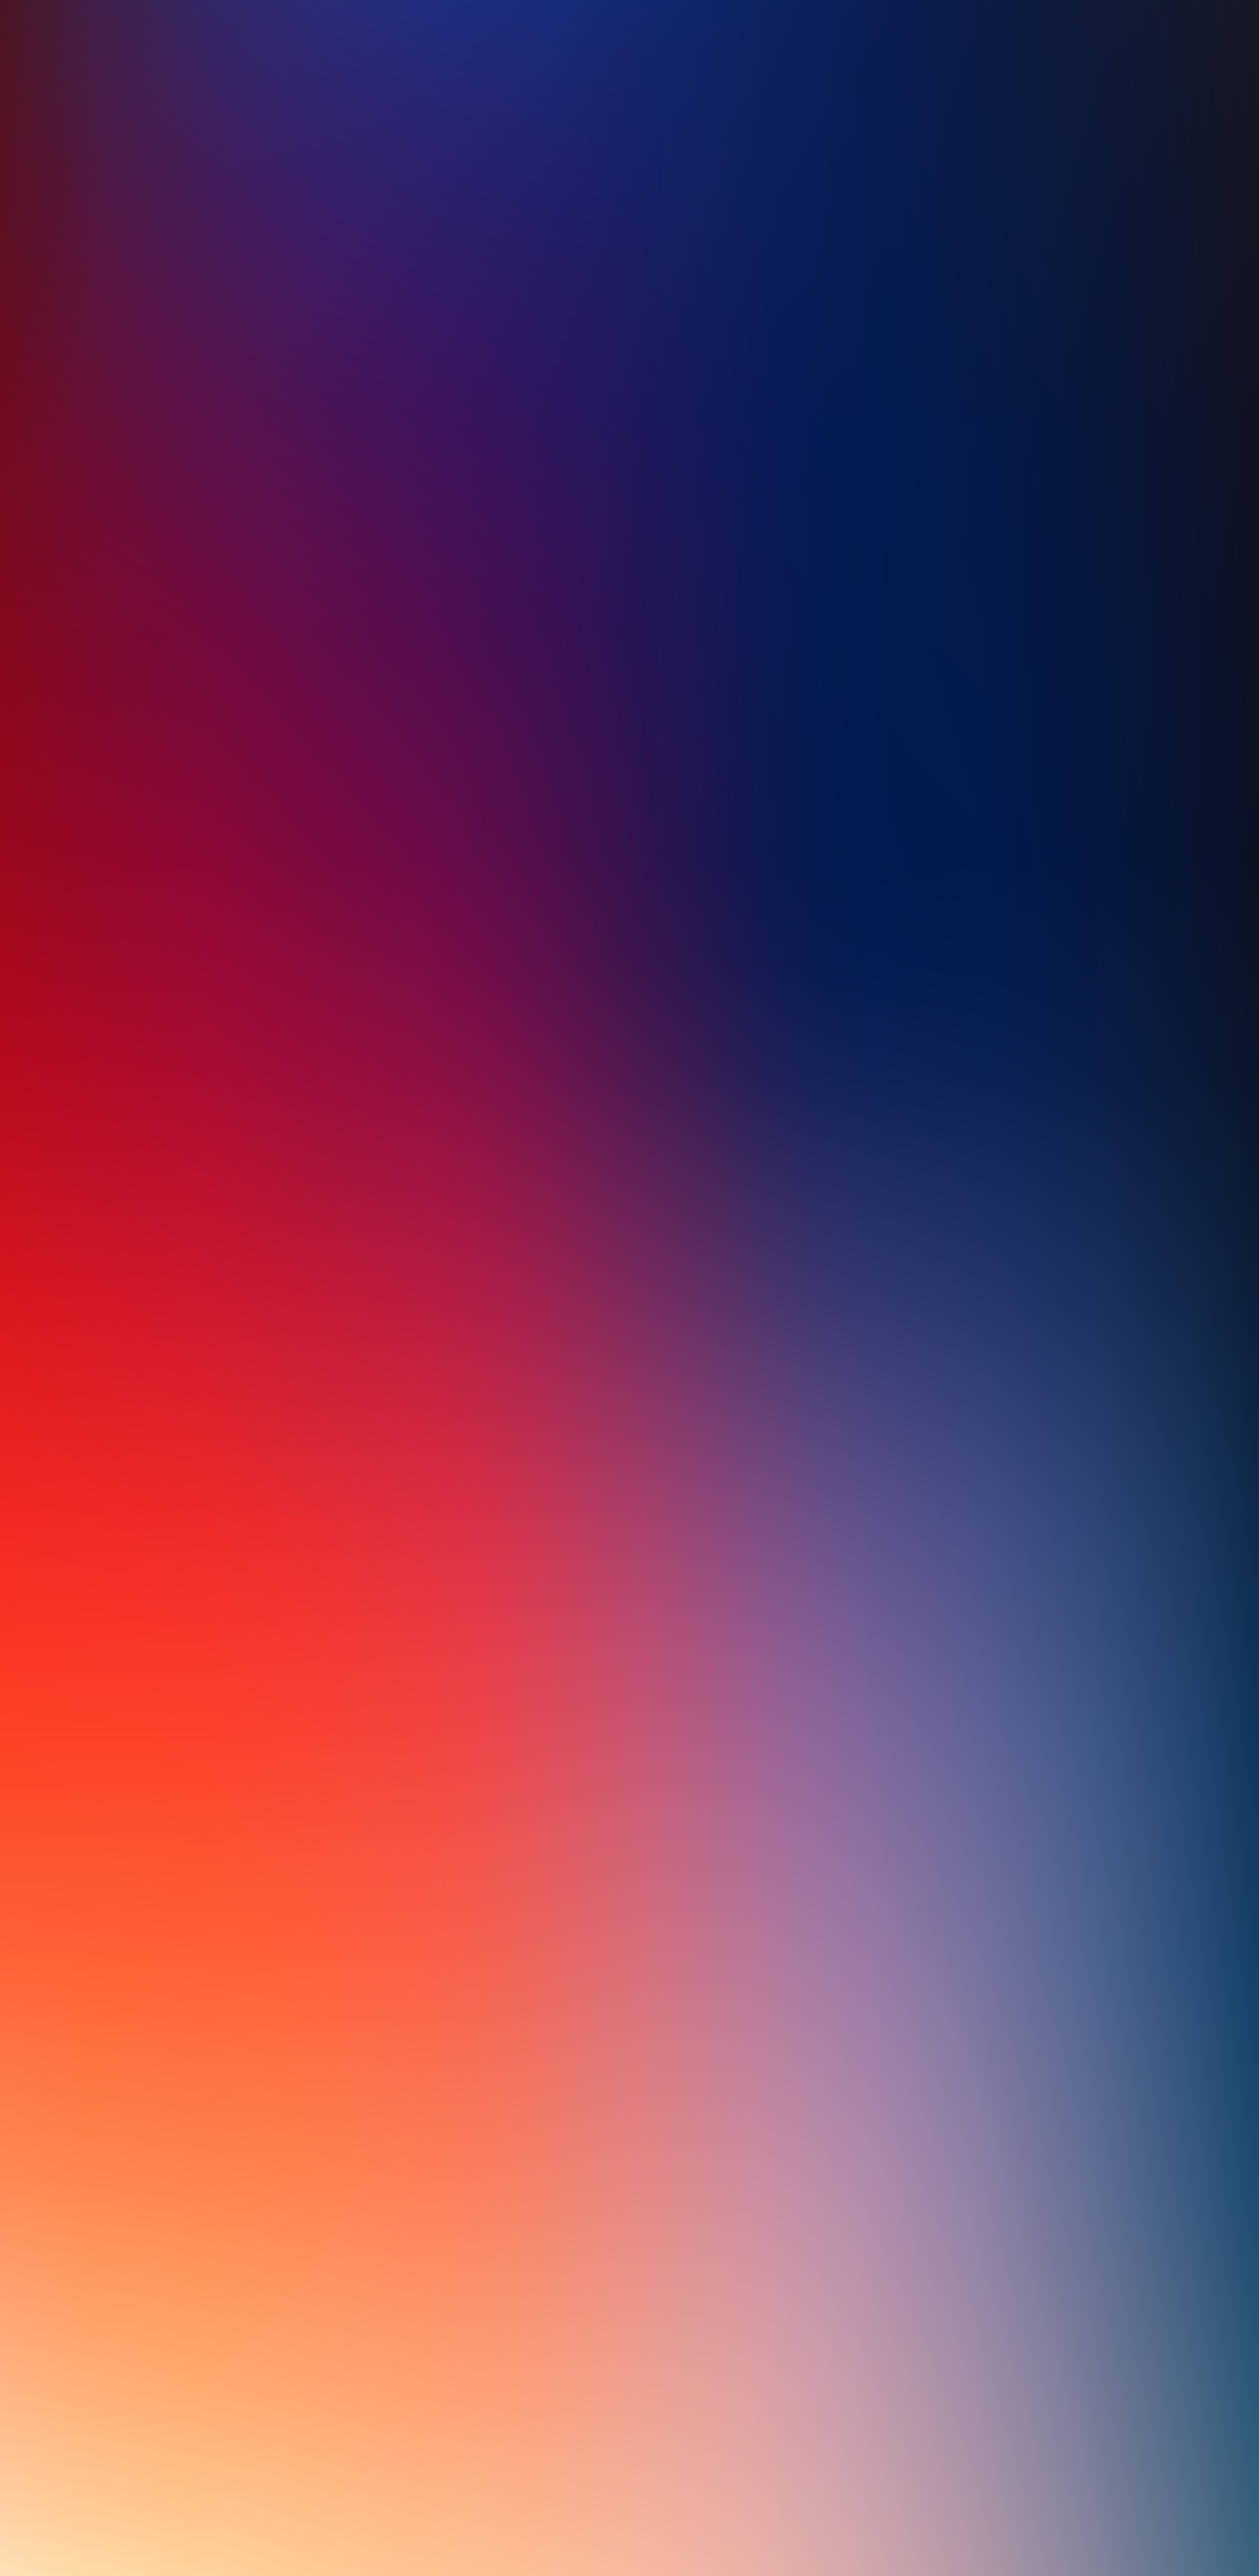 Iridescence Light by AR7 iPhone Wallpapers Free Download